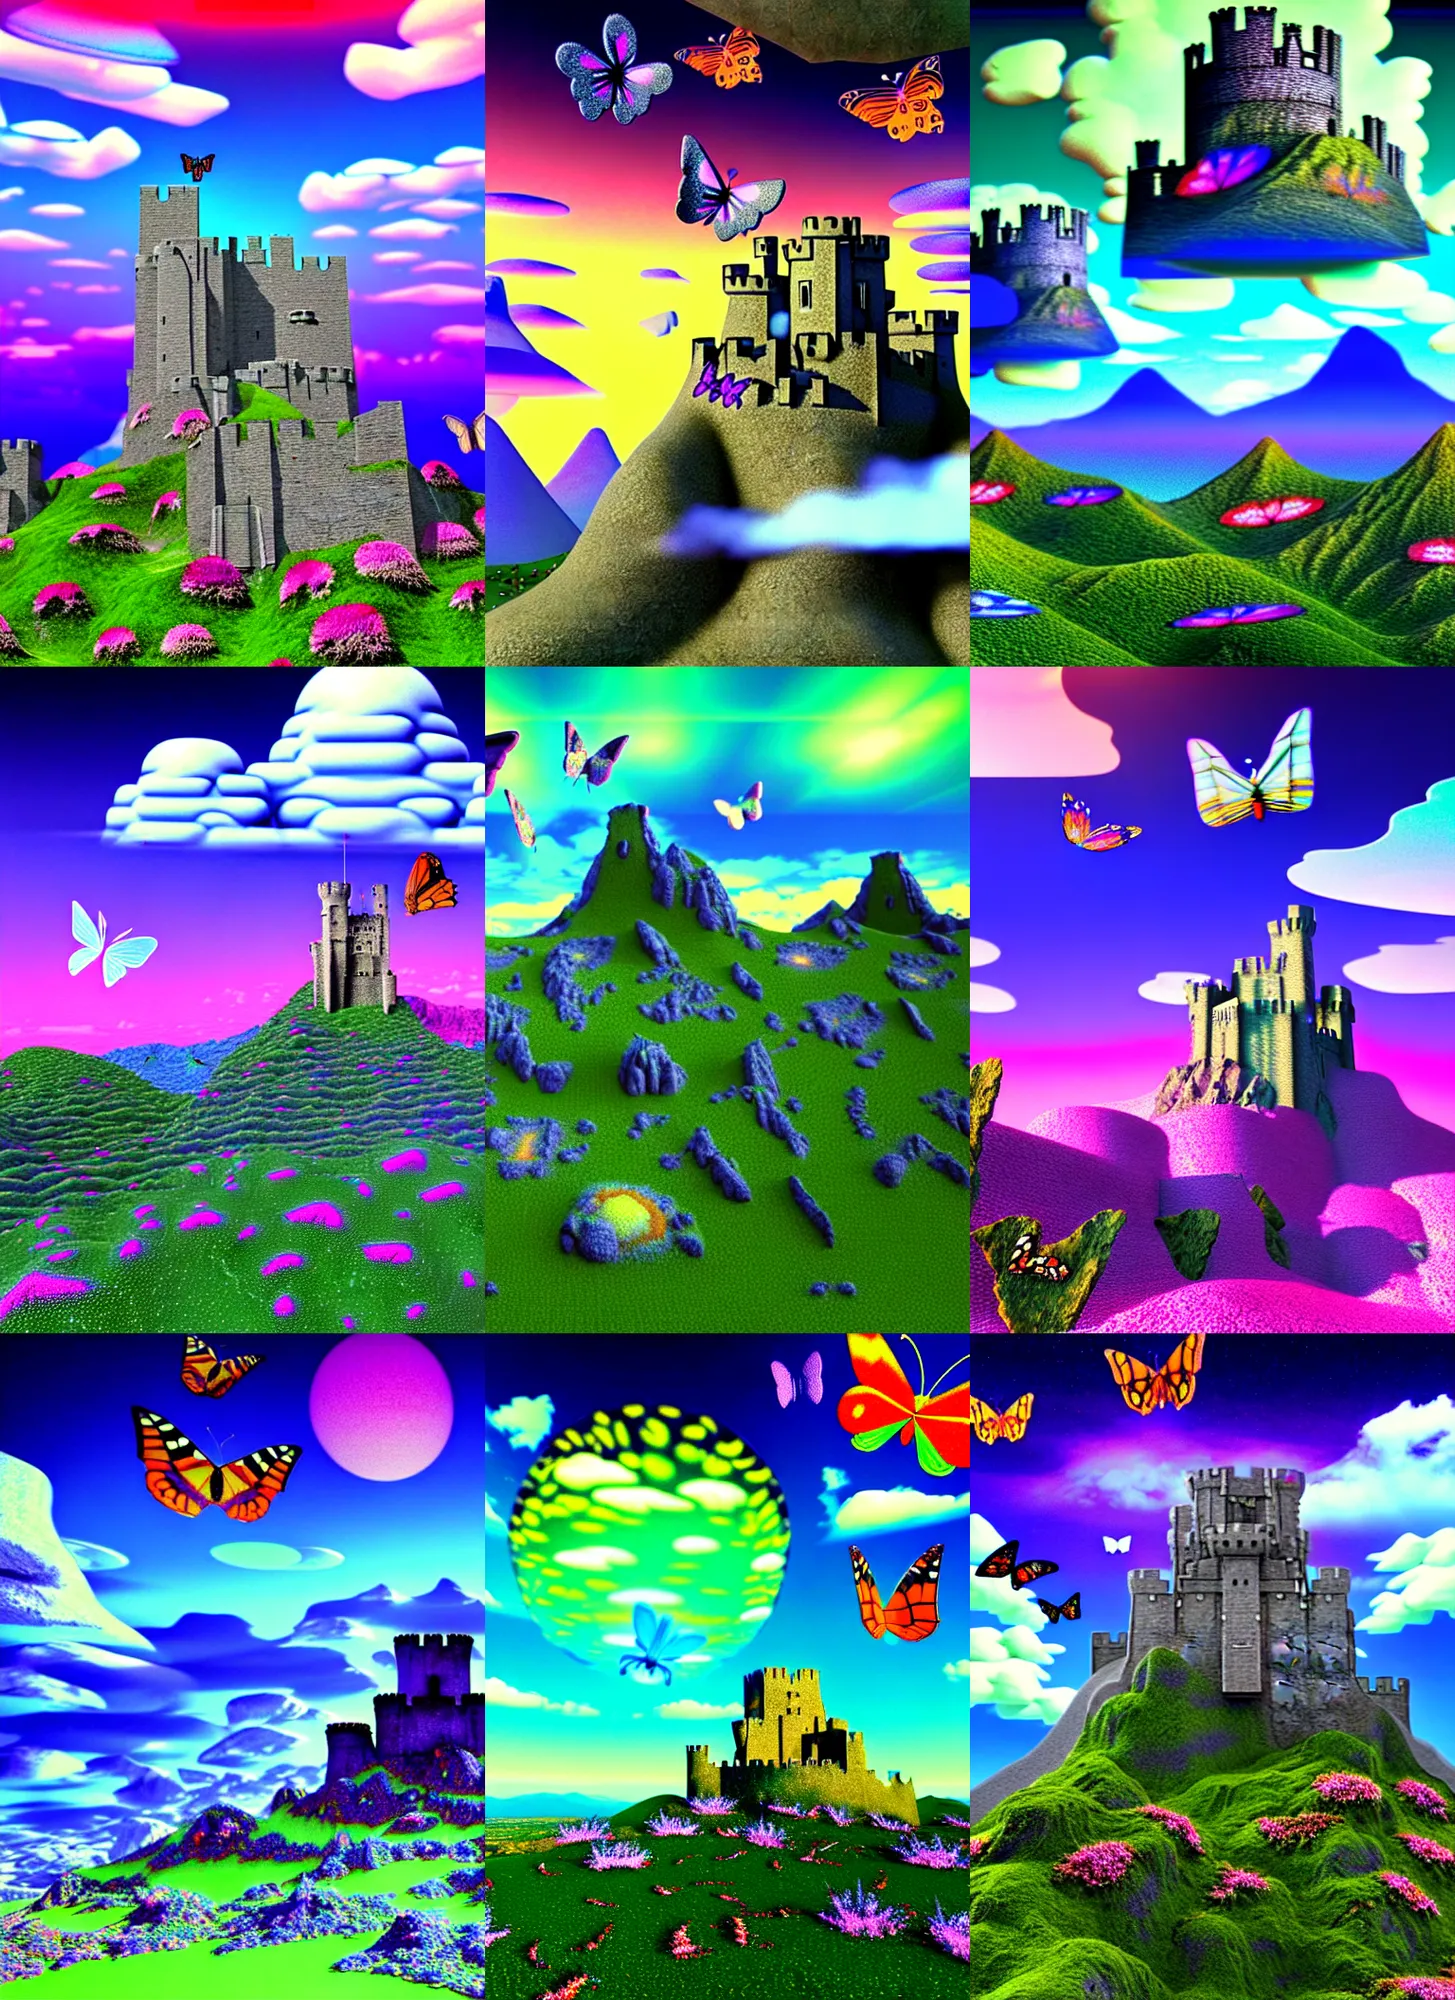 Prompt: 3 d render of cybernetic mountain landscape with 3 d cgi castle ruins and butterflies in the sky against a psychedelic surreal sky cloud background with 3 d butterflies and 3 d flowers n the style of 1 9 9 0's cg graphics, lsd dream emulator, 3 d rendered y 2 k aesthetic by ichiro tanida, 3 do magazine, wide shot